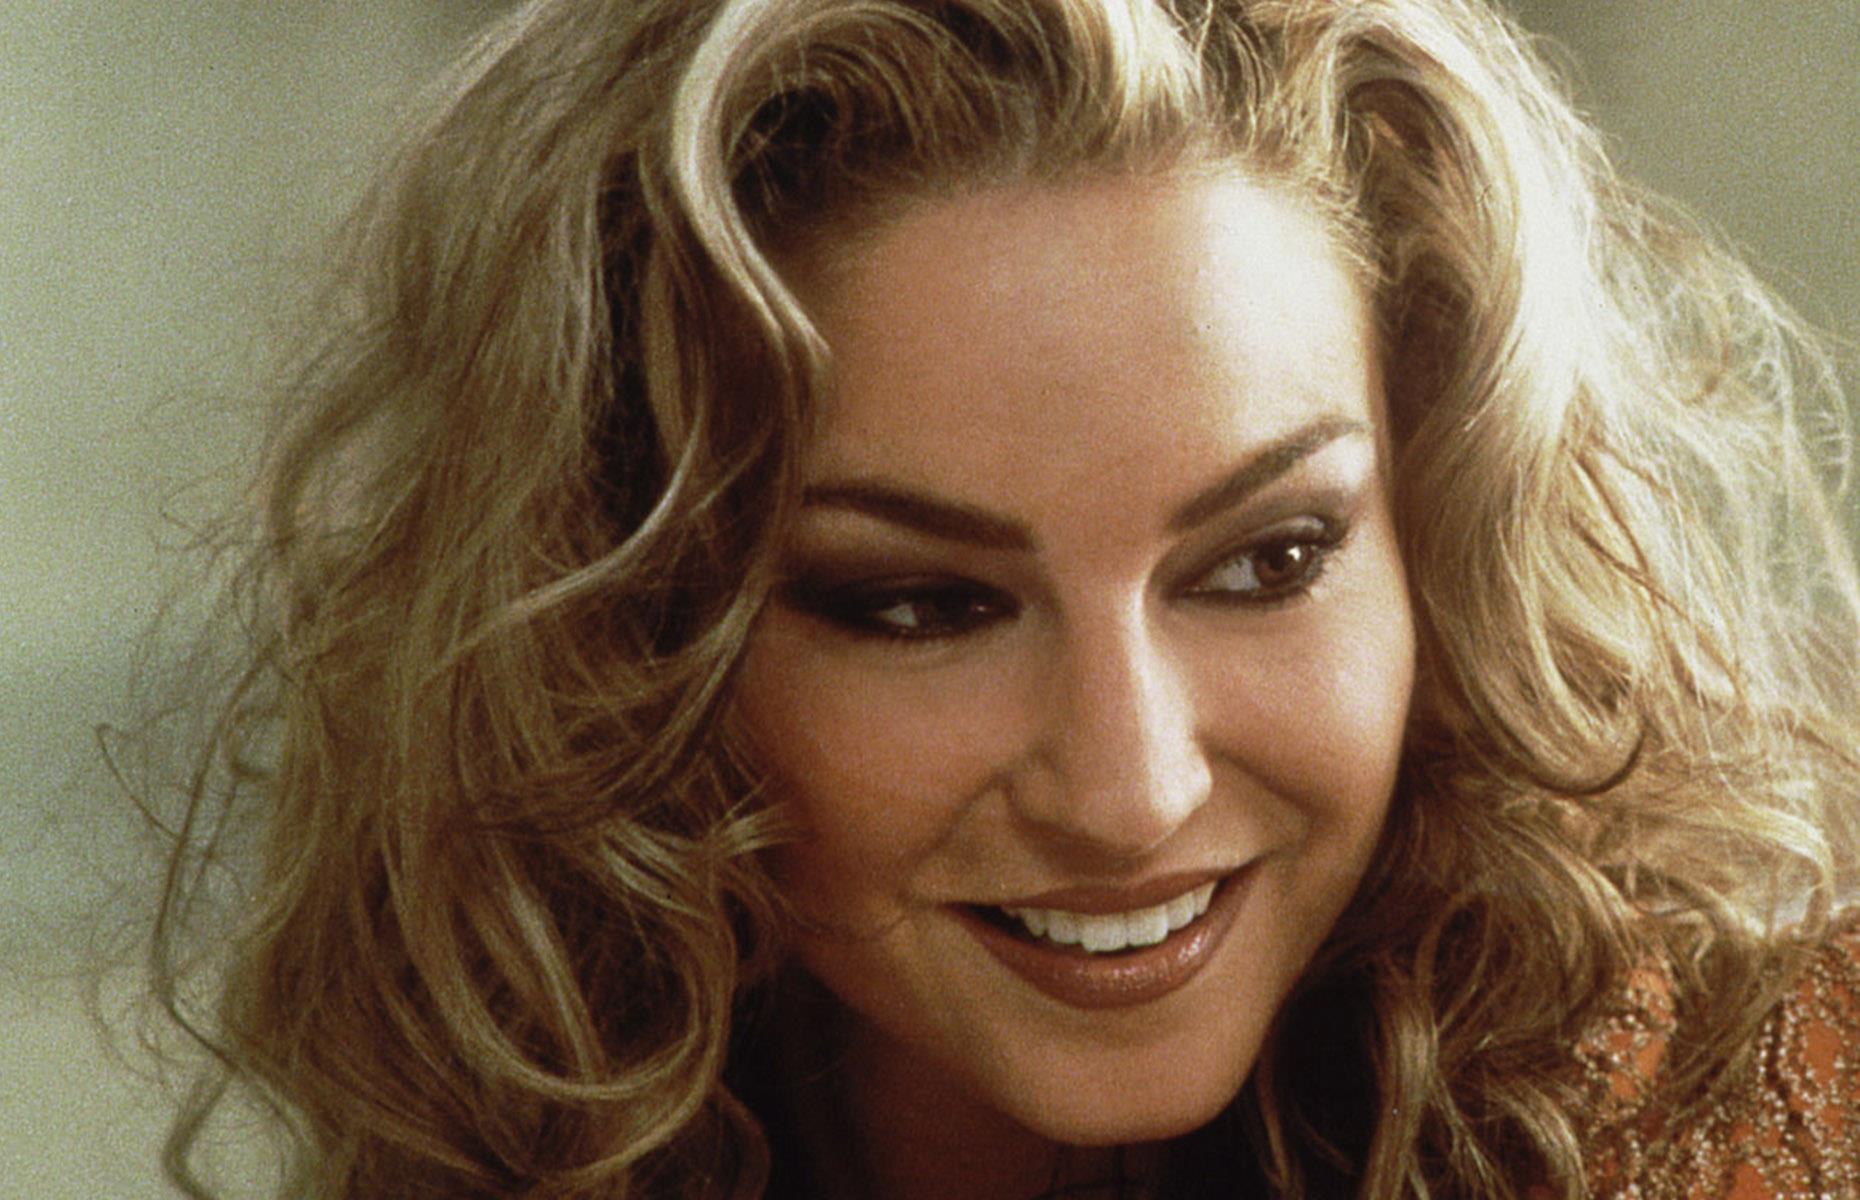 <p>Drea de Matteo played Adriana La Cerva, the partner of mobster Christopher Moltisanti. She featured in the show's first five seasons as a regular character and returned as a guest star in the final season.</p>  <p>The actress made her screen debut in 1996, appearing in an episode of the TV series <em>Swift Justice.</em></p>  <p><em>The Sopranos</em> undoubtedly signalled a big break for de Matteo, and she won the 2004 Emmy for Outstanding Supporting Actress in a Drama Series thanks to her gritty performance in the crime series.</p>